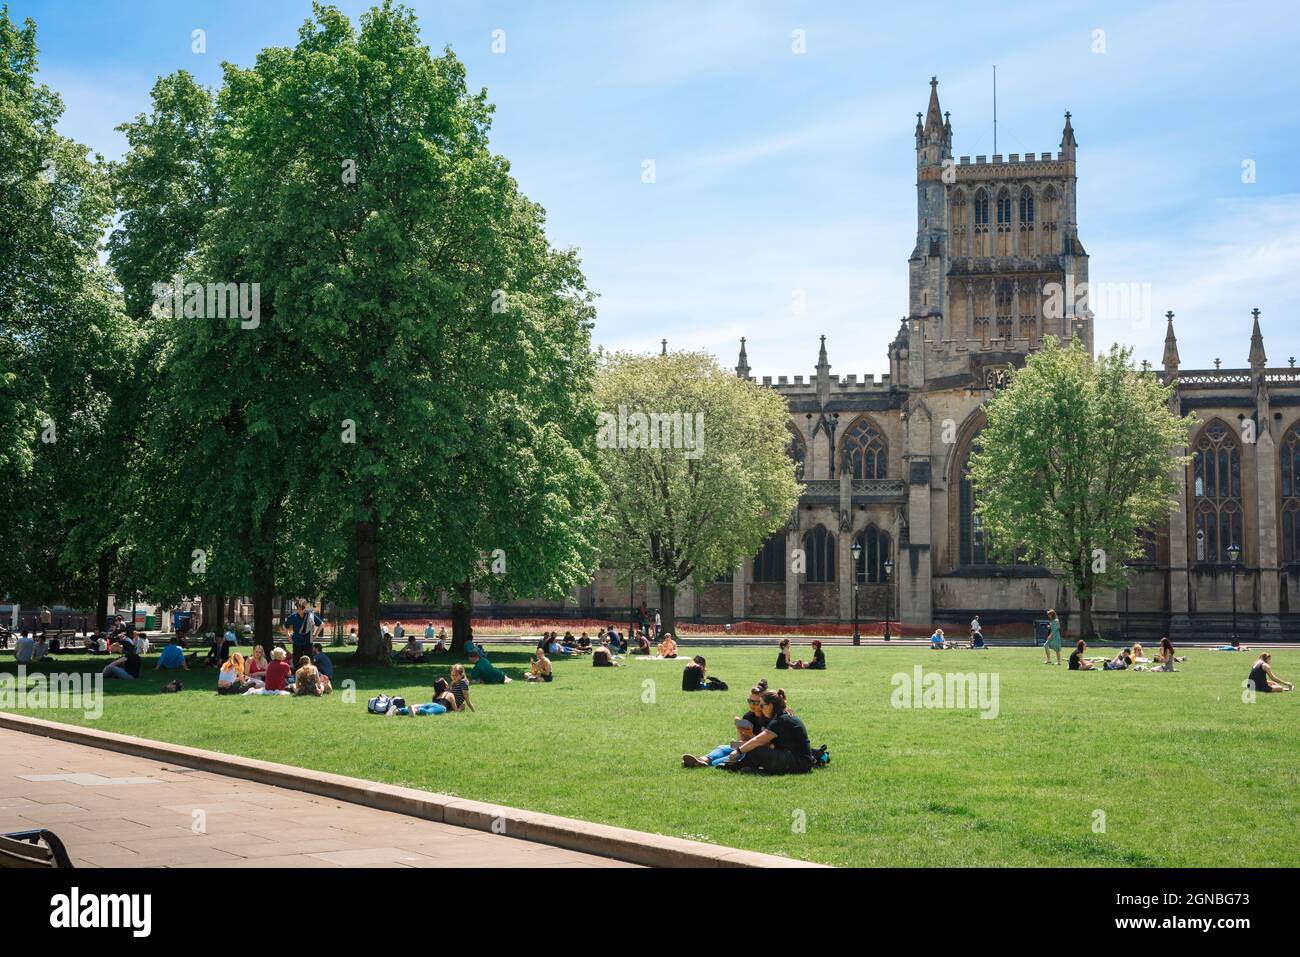 Bristol College Green, view in summer of people relaxing in College Green, a popular green space in the historic centre of Bristol, Avon, England, UK Stock Photo